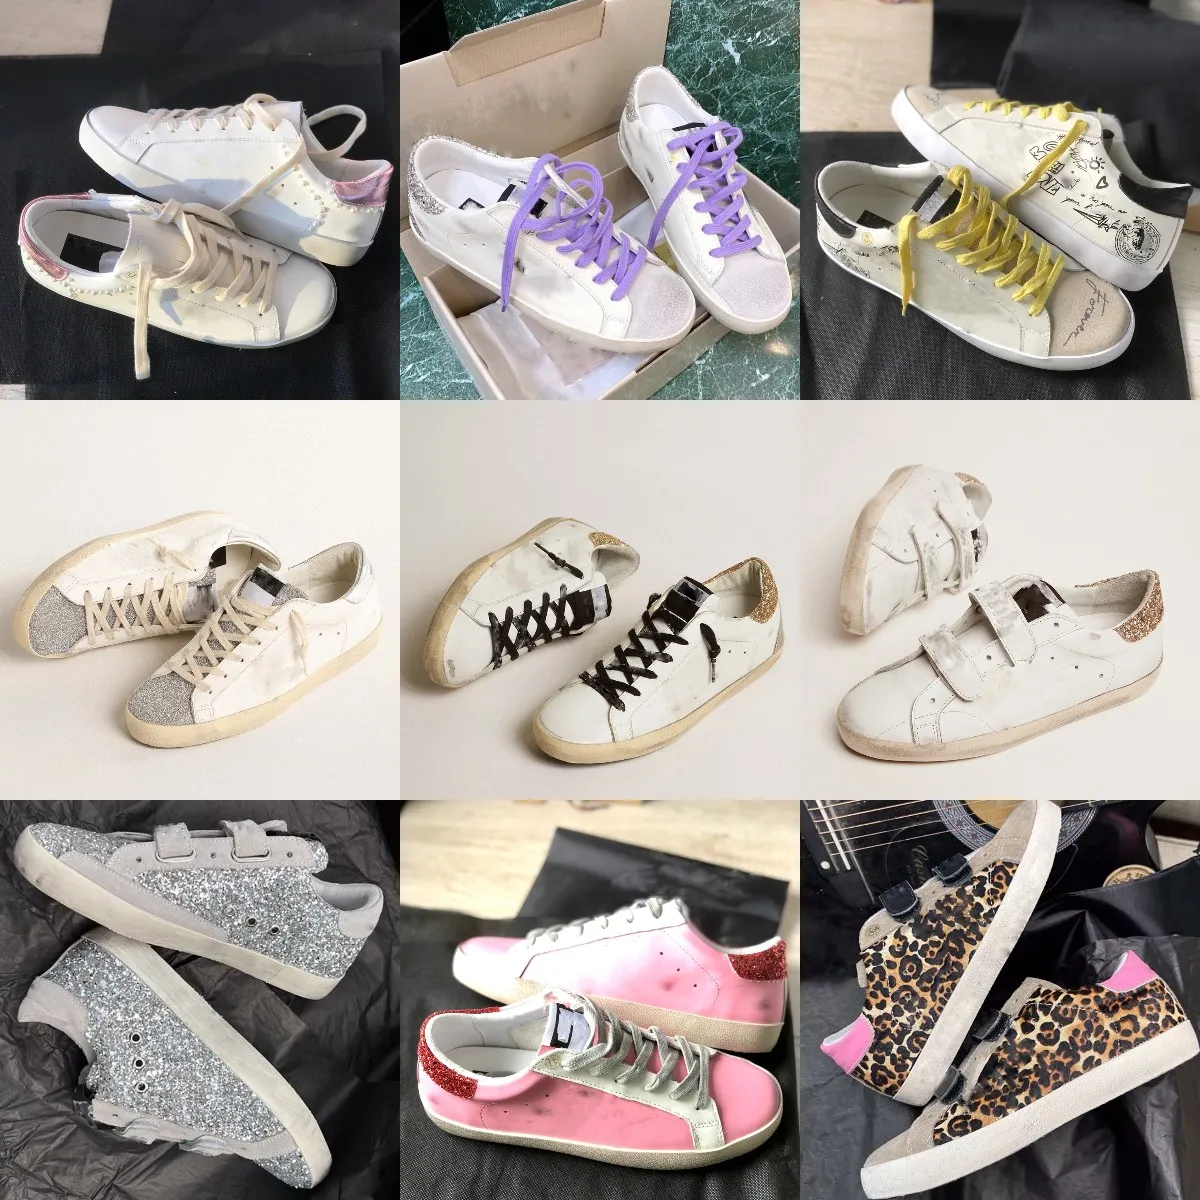 Designer Star Women Sneakers Luxury Fashion Casual Shoes Italy Brand Classic White Do-Old Sequin Dirty Best Quality Shoe